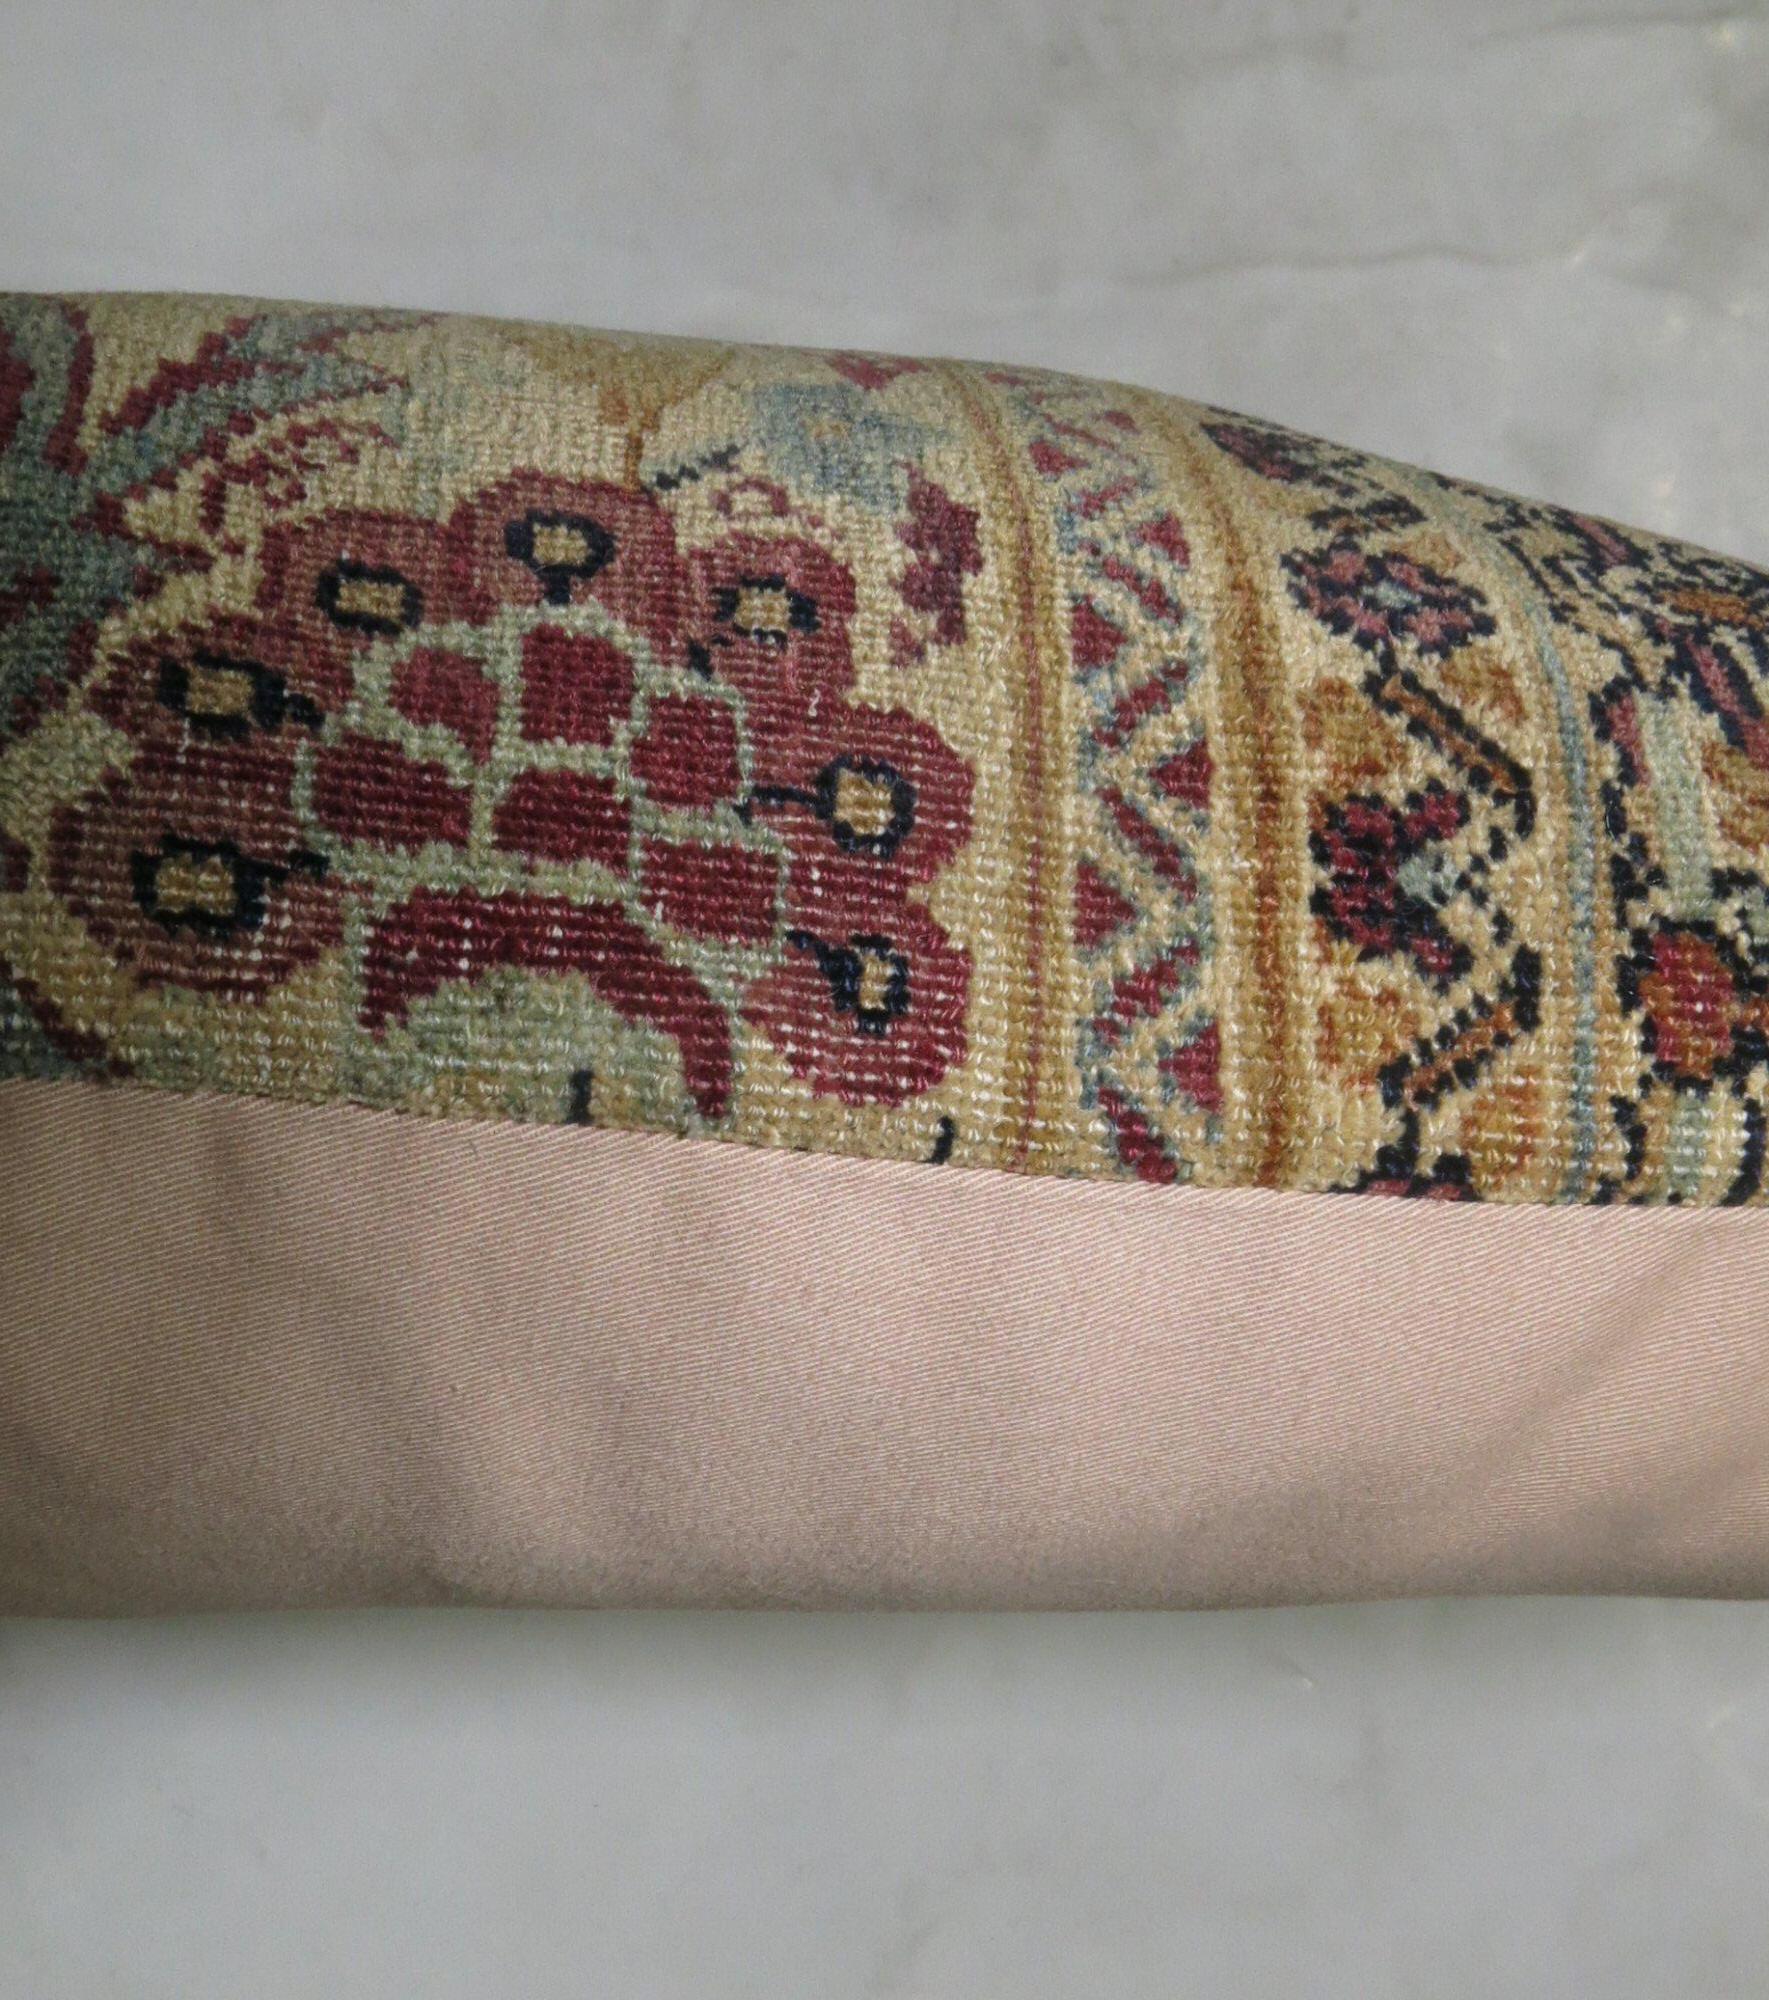 Pillow made from a 19th century Persian Kerman rug. Fill insert and zipper closure provided

Measures: 13